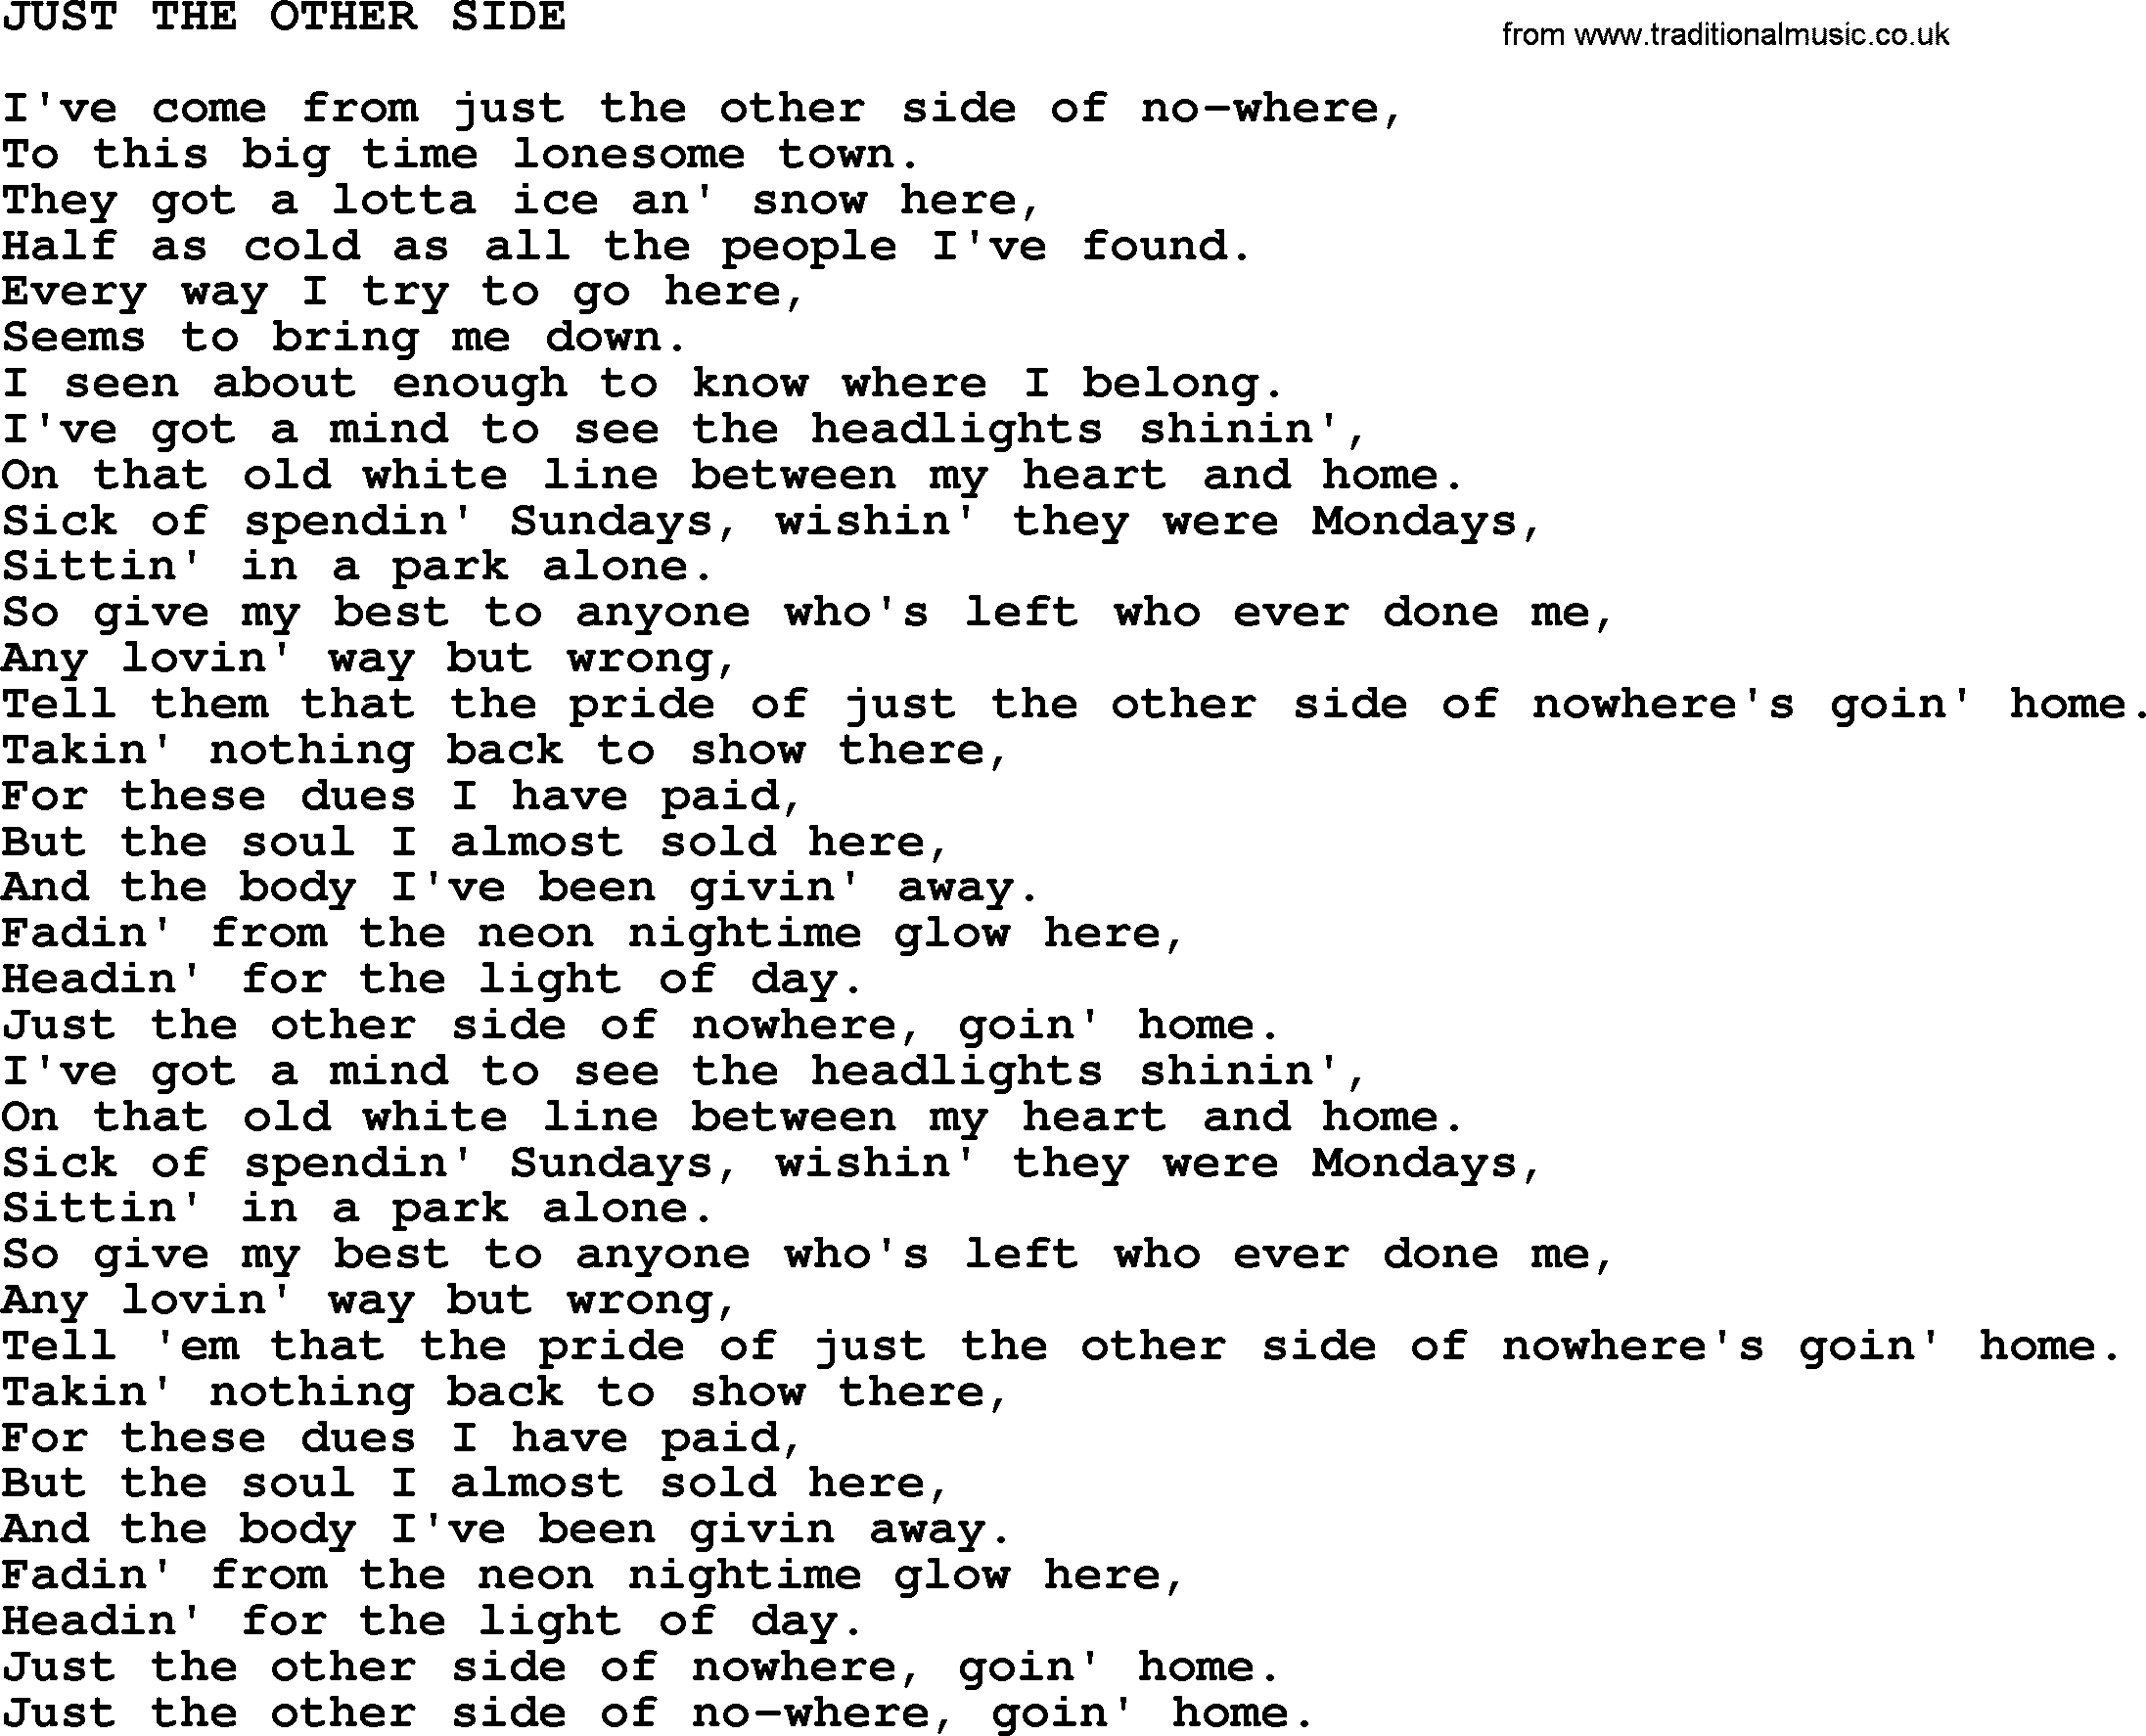 Johnny Cash song Just The Other Side.txt lyrics